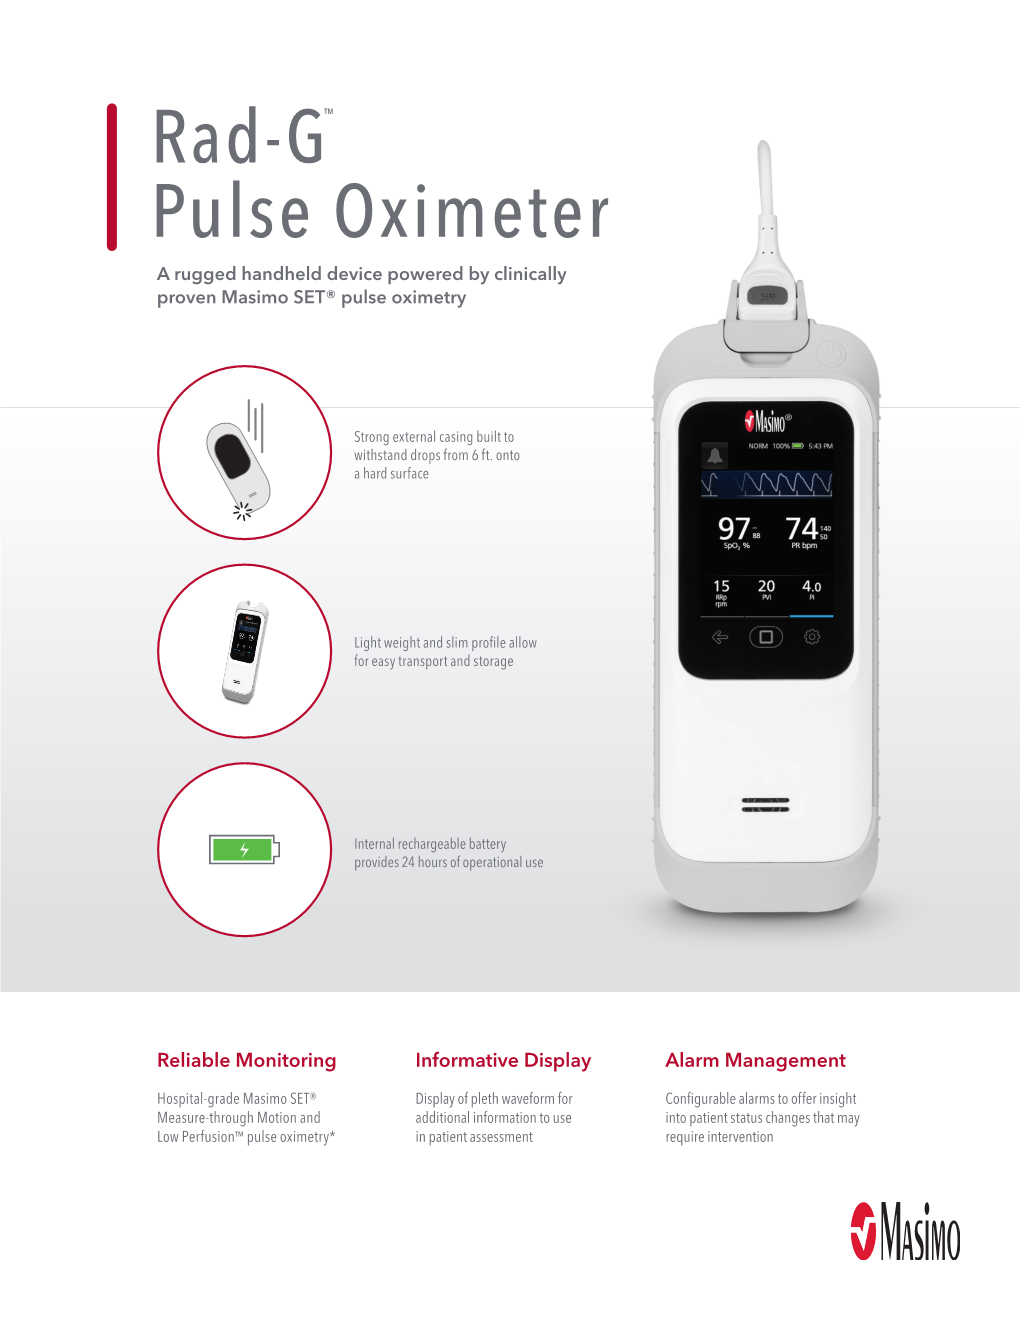 Pulse Oximeter a Rugged Handheld Device Powered by Clinically Proven Masimo SET® Pulse Oximetry